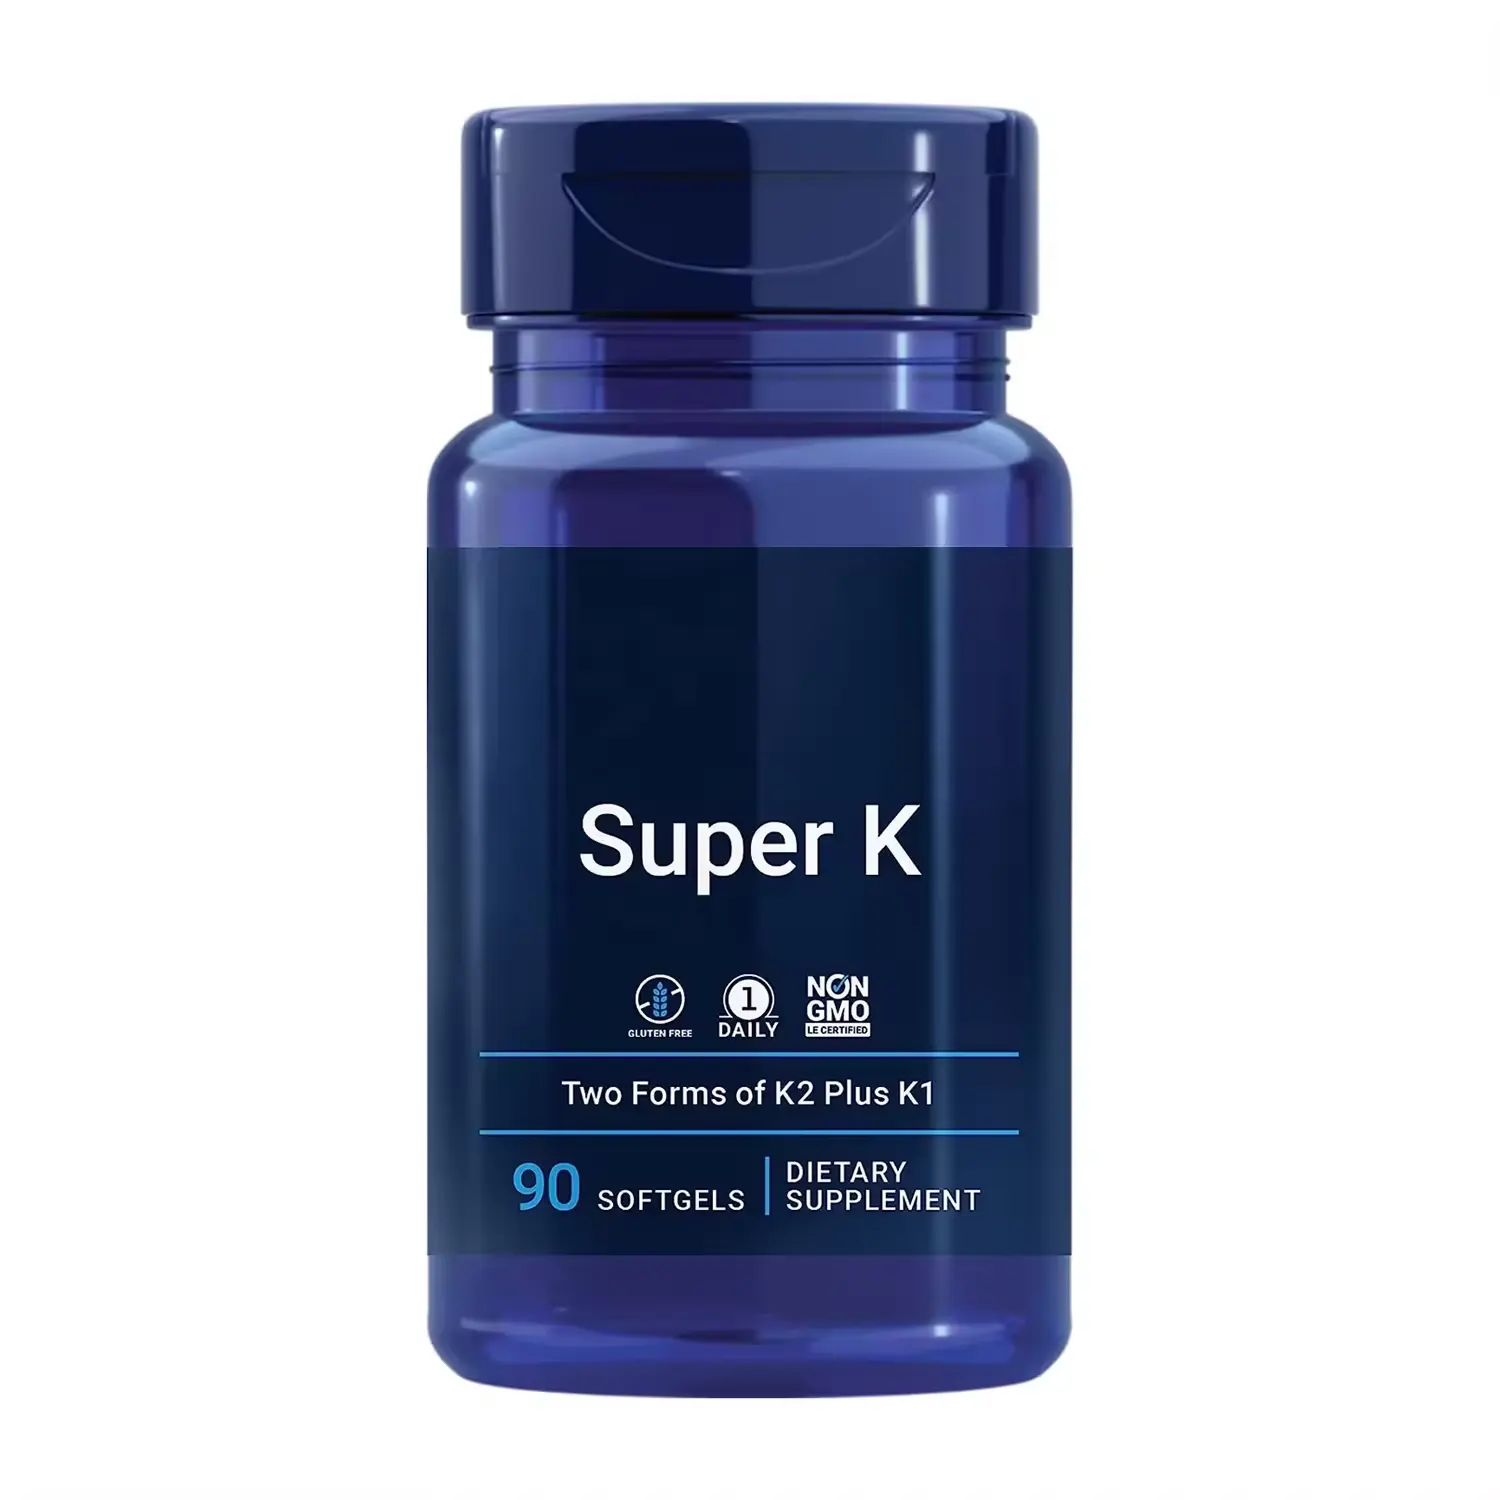 JIABEIKANG OEM Private Label Super K K1 K2 And Vitamin C Healthcare Supplement Nutrition Softgel Capsules